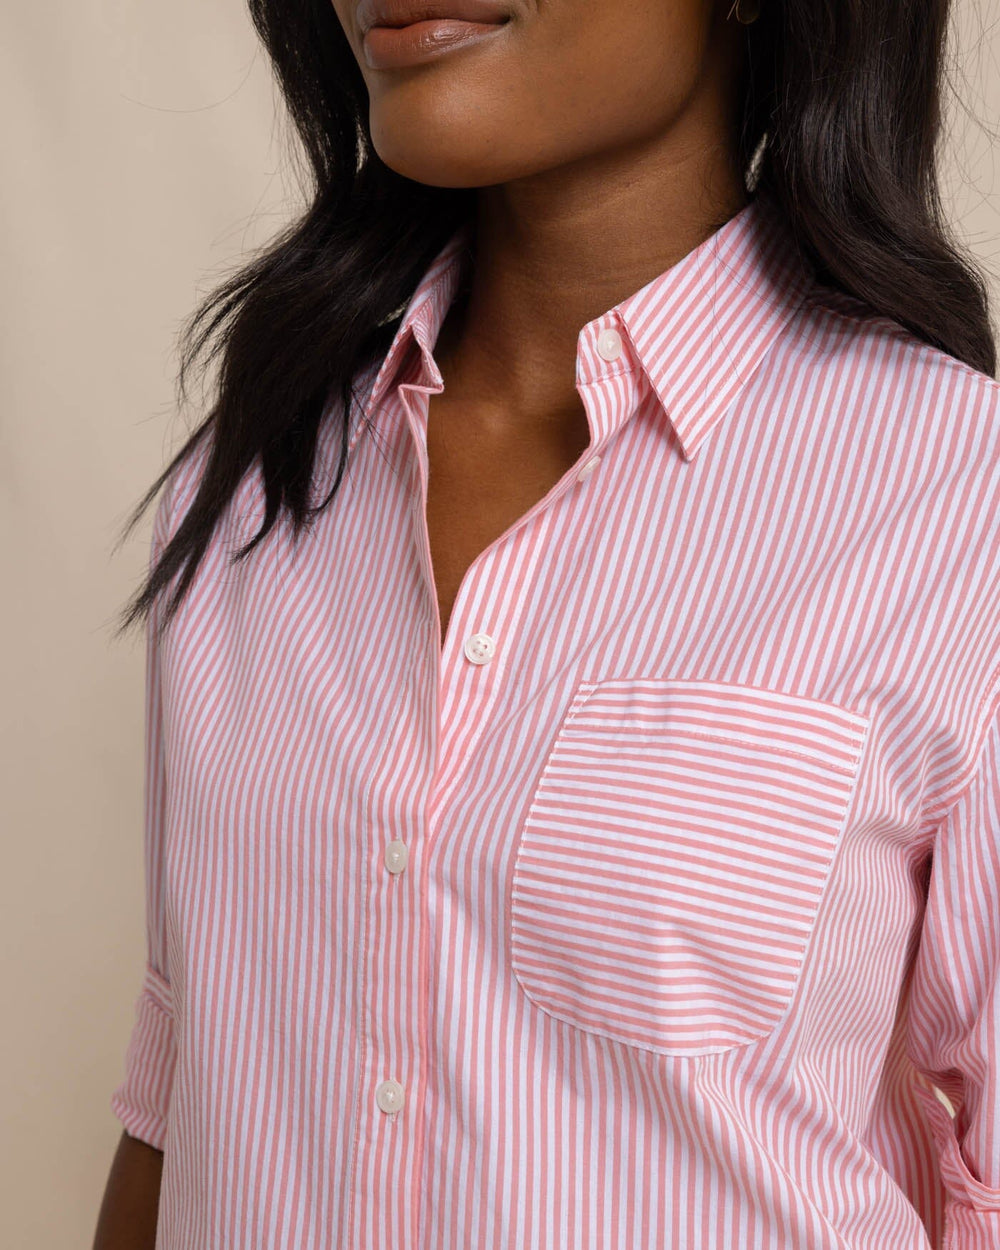 The detail view of the Southern Tide Cam Stripe Poplin Dress by Southern Tide - Conch Shell